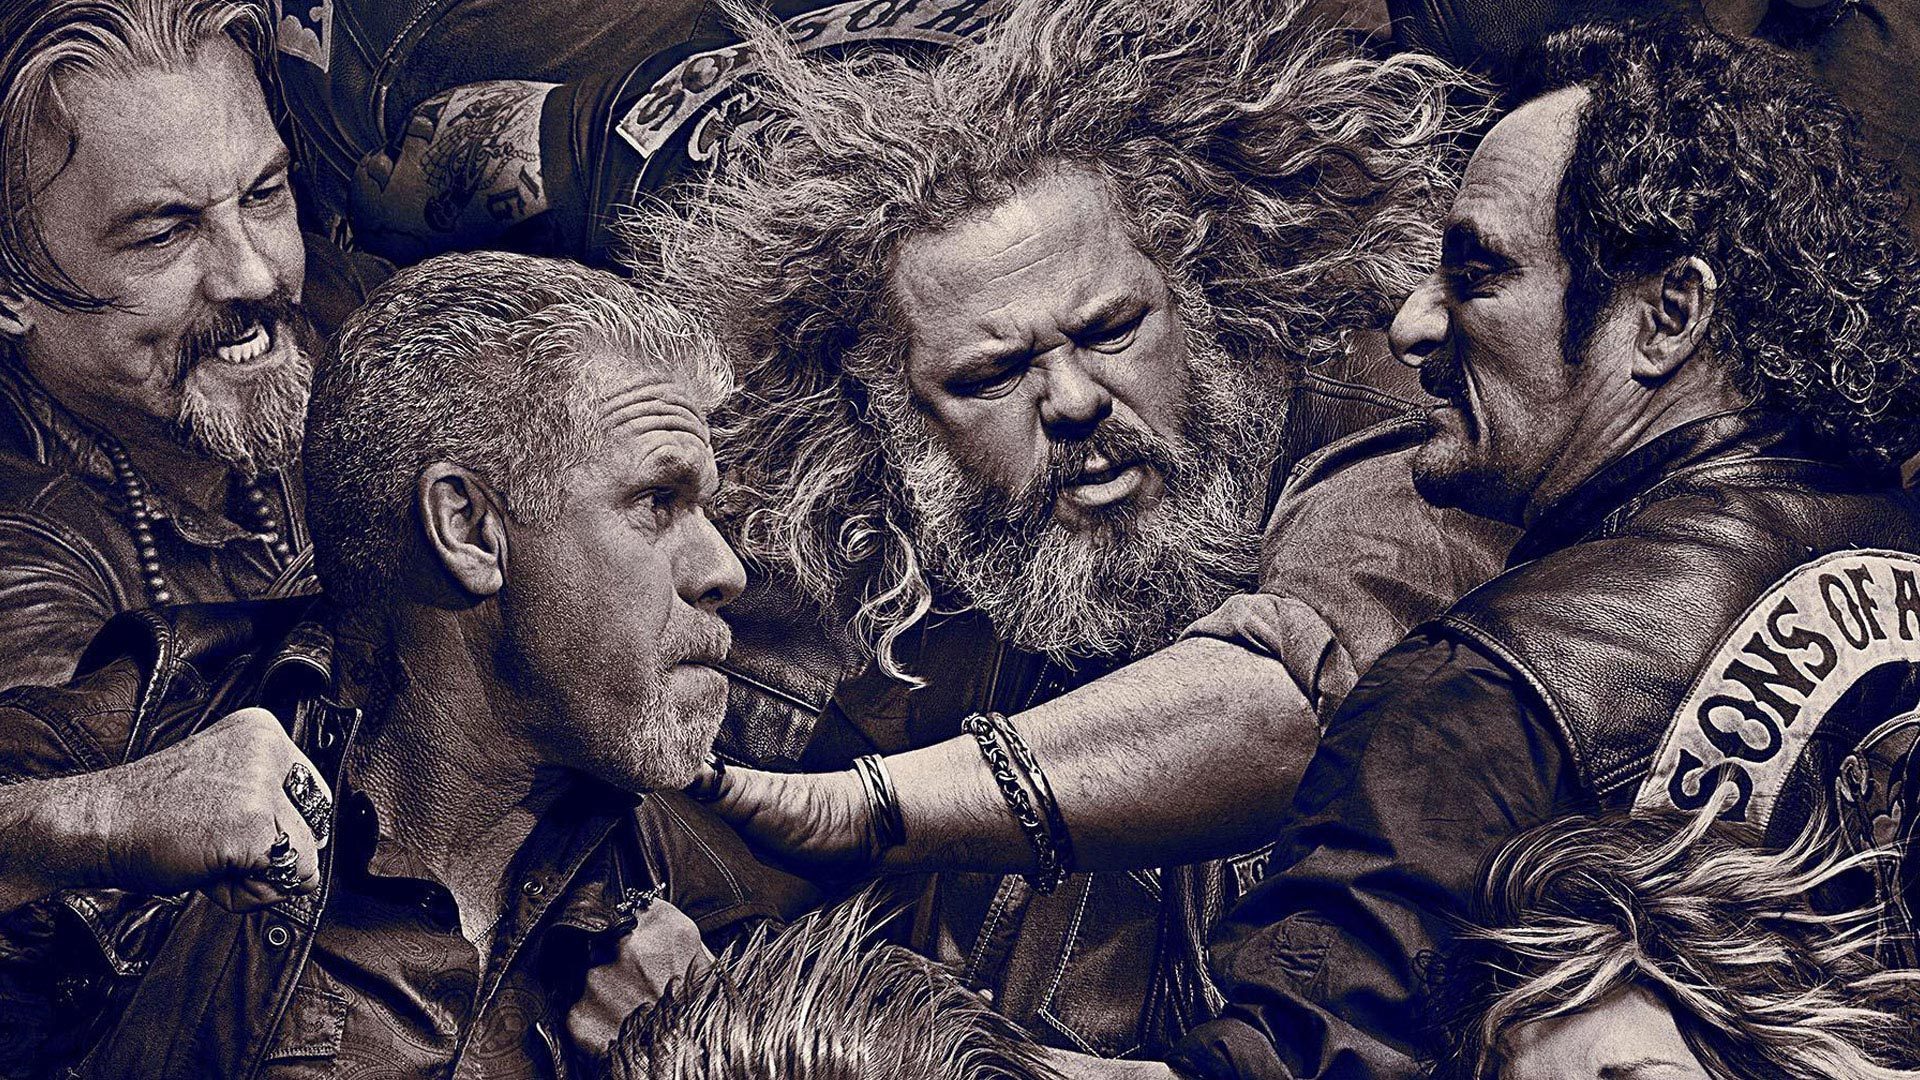 Sons Of Anarchy Art. 